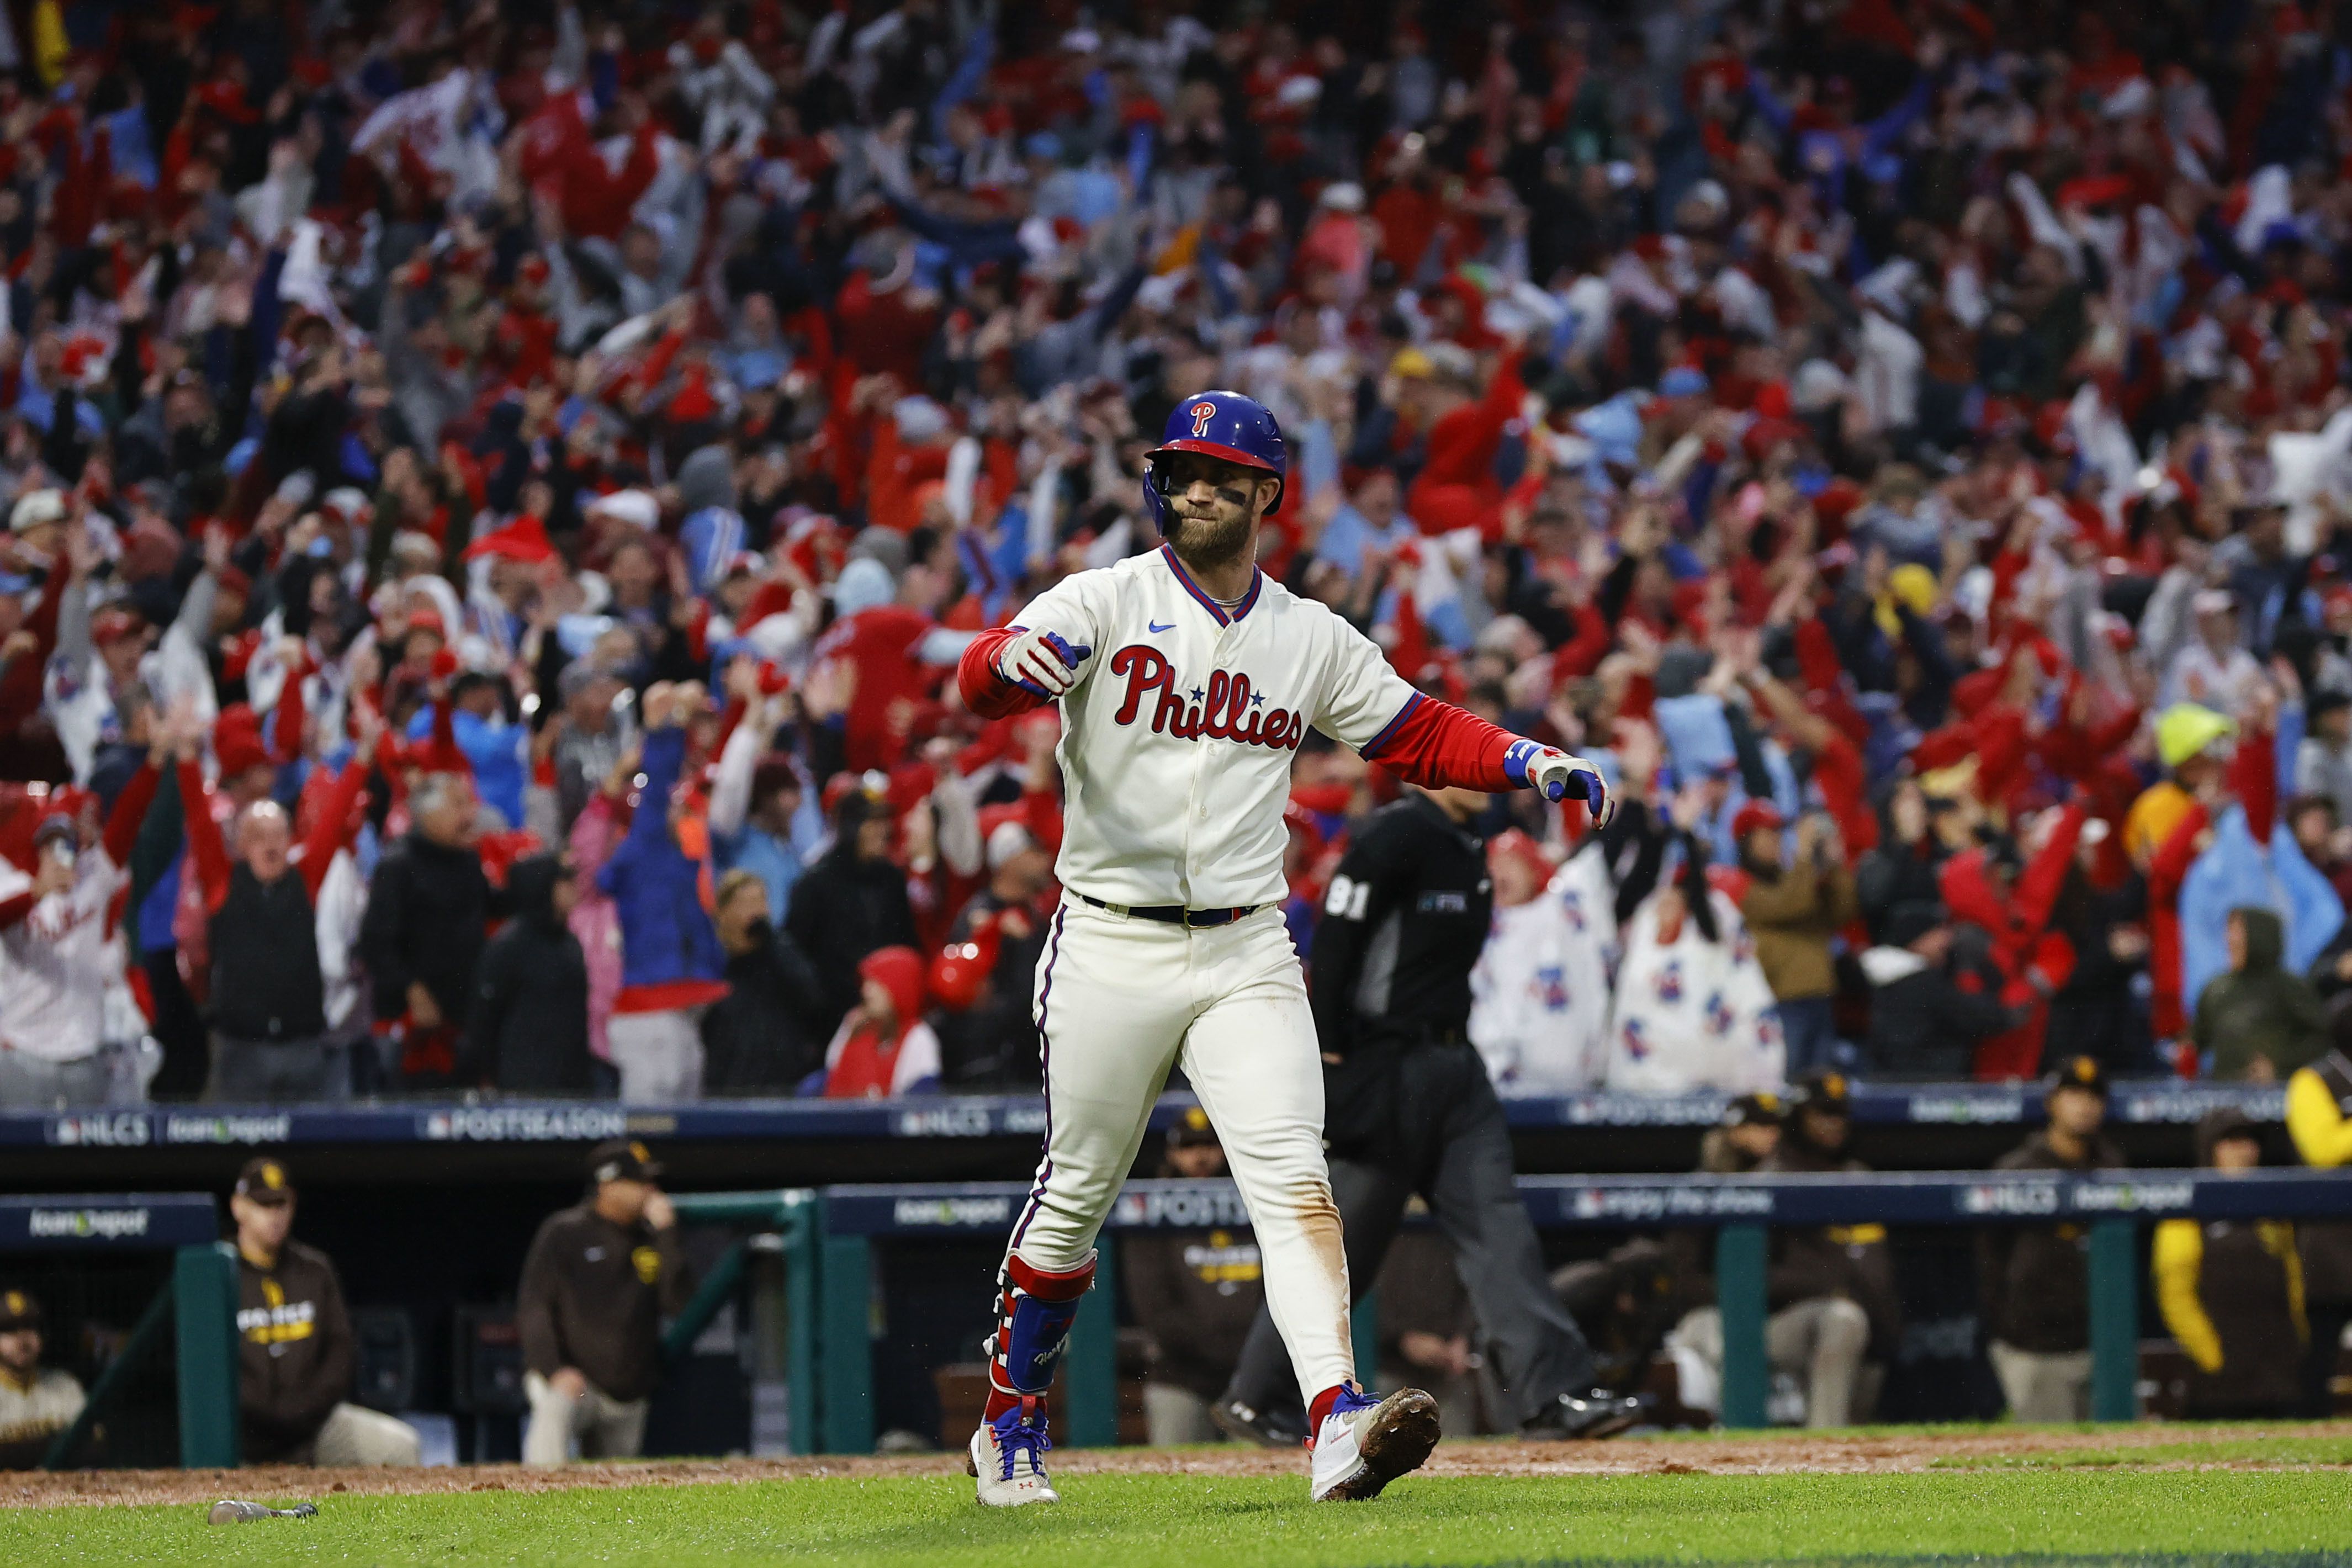 Ranking the top 10 Phillies non-World Series playoff moments